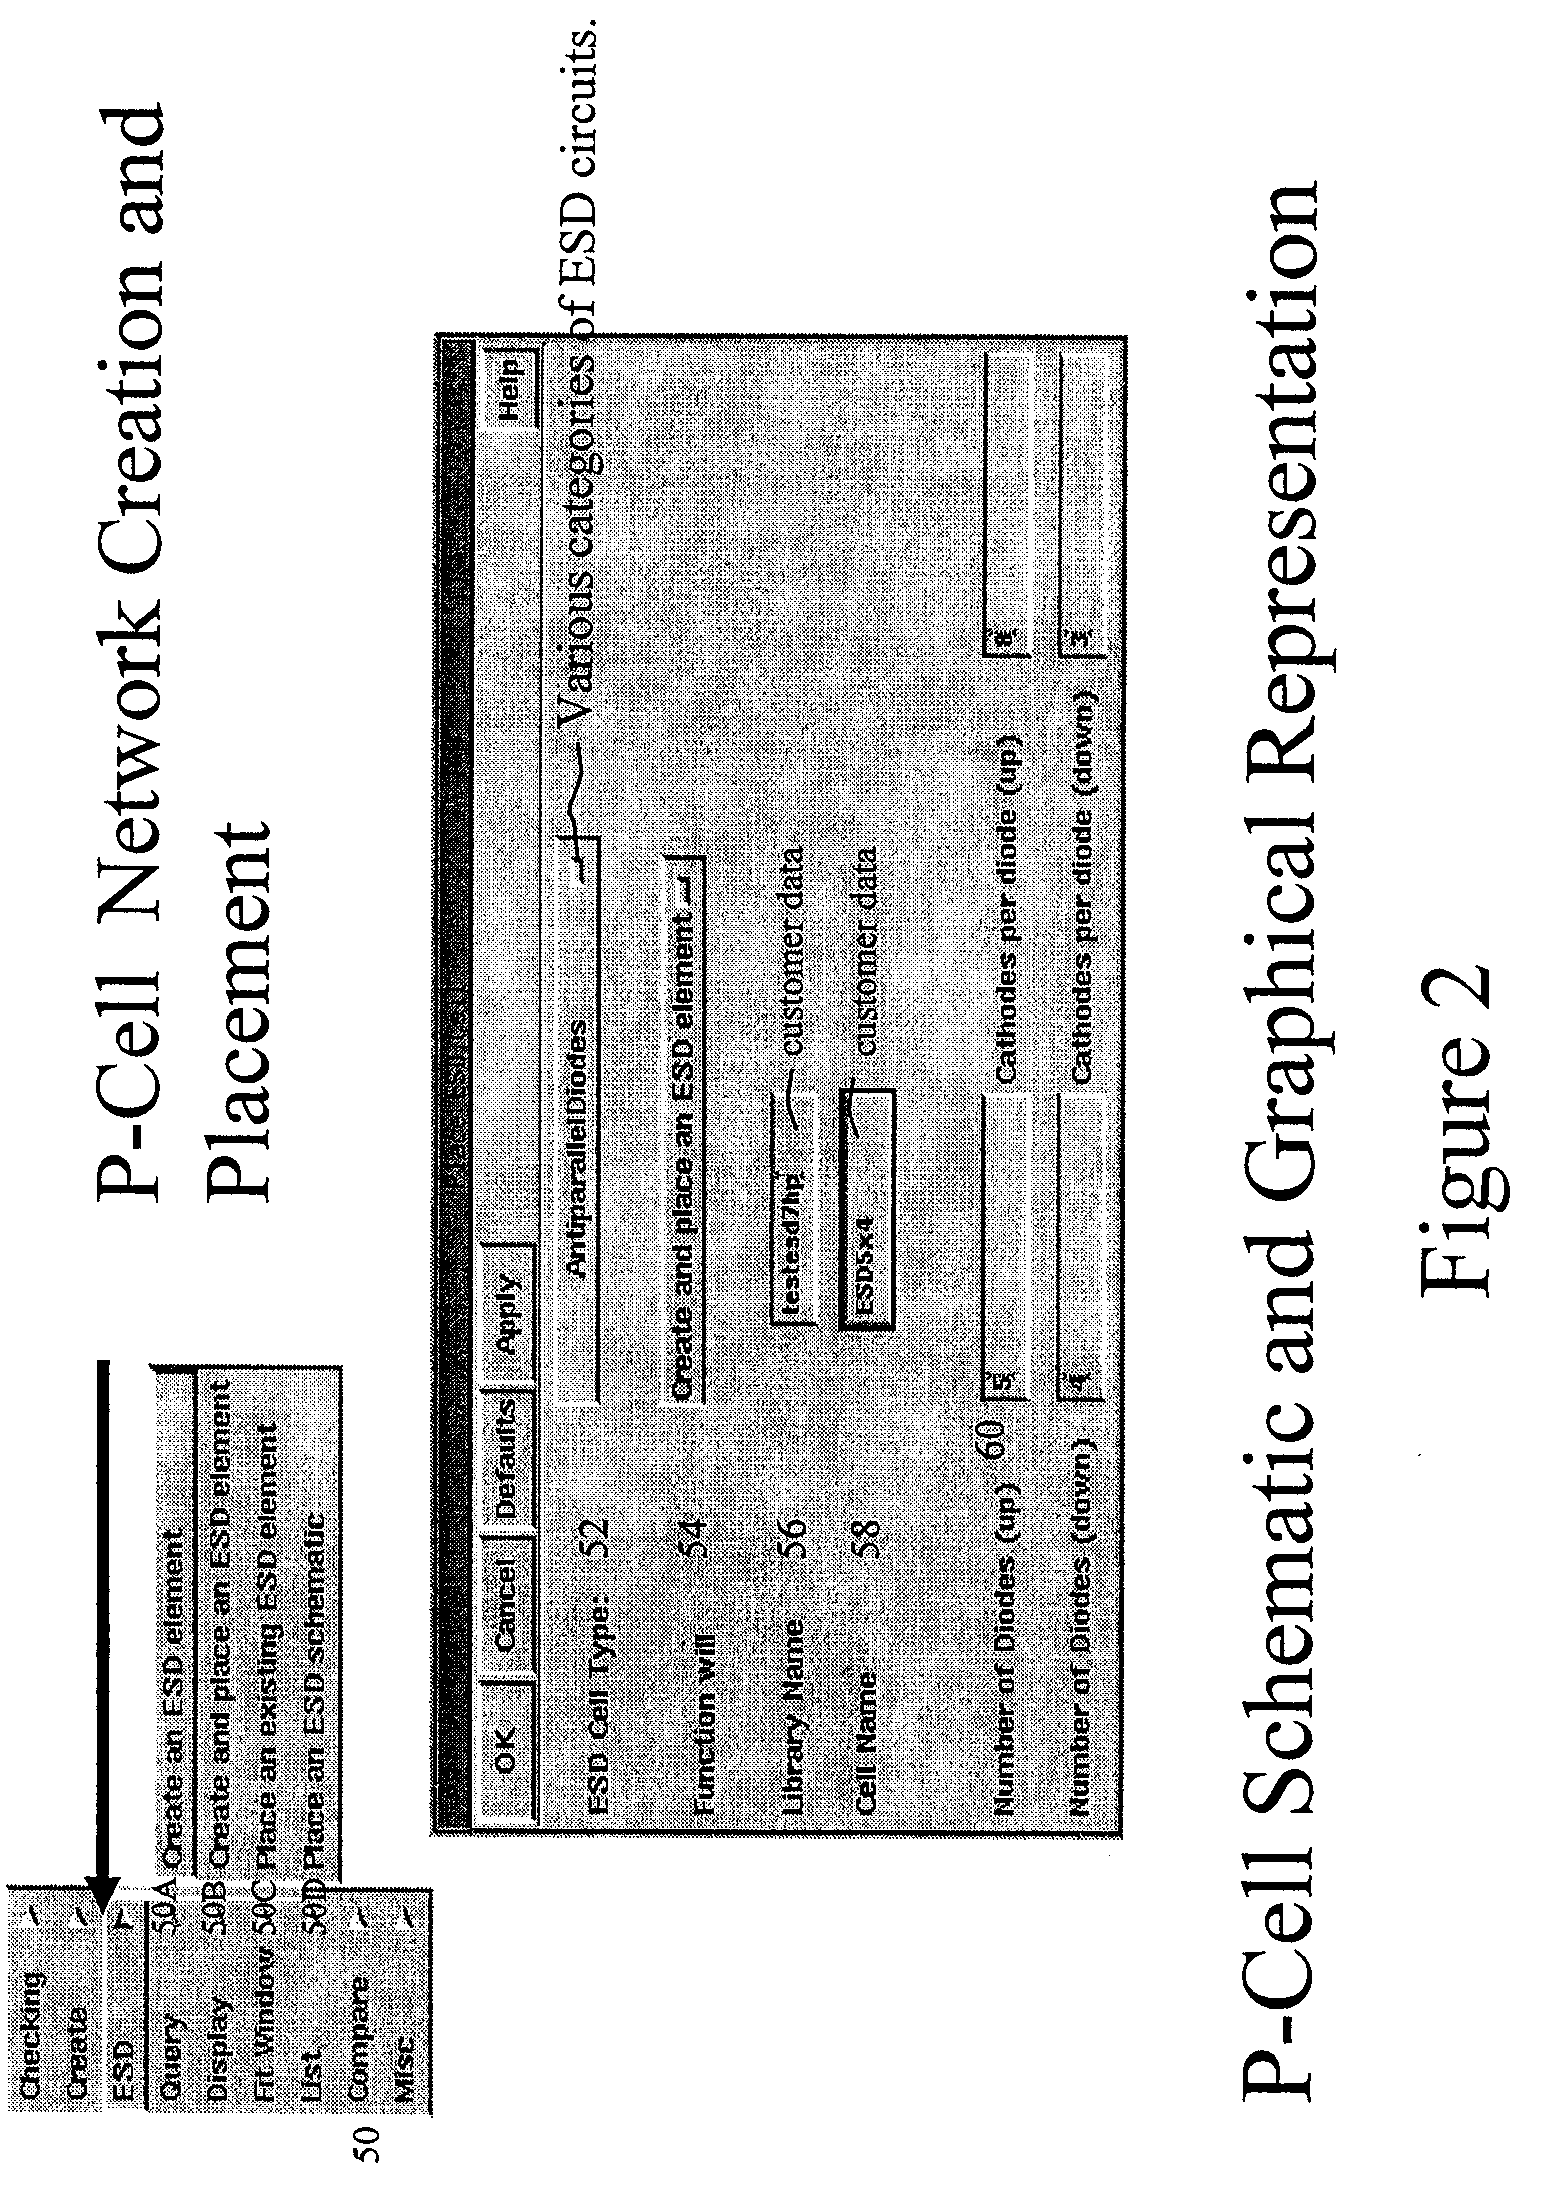 ESD design, verification and checking system and method of use